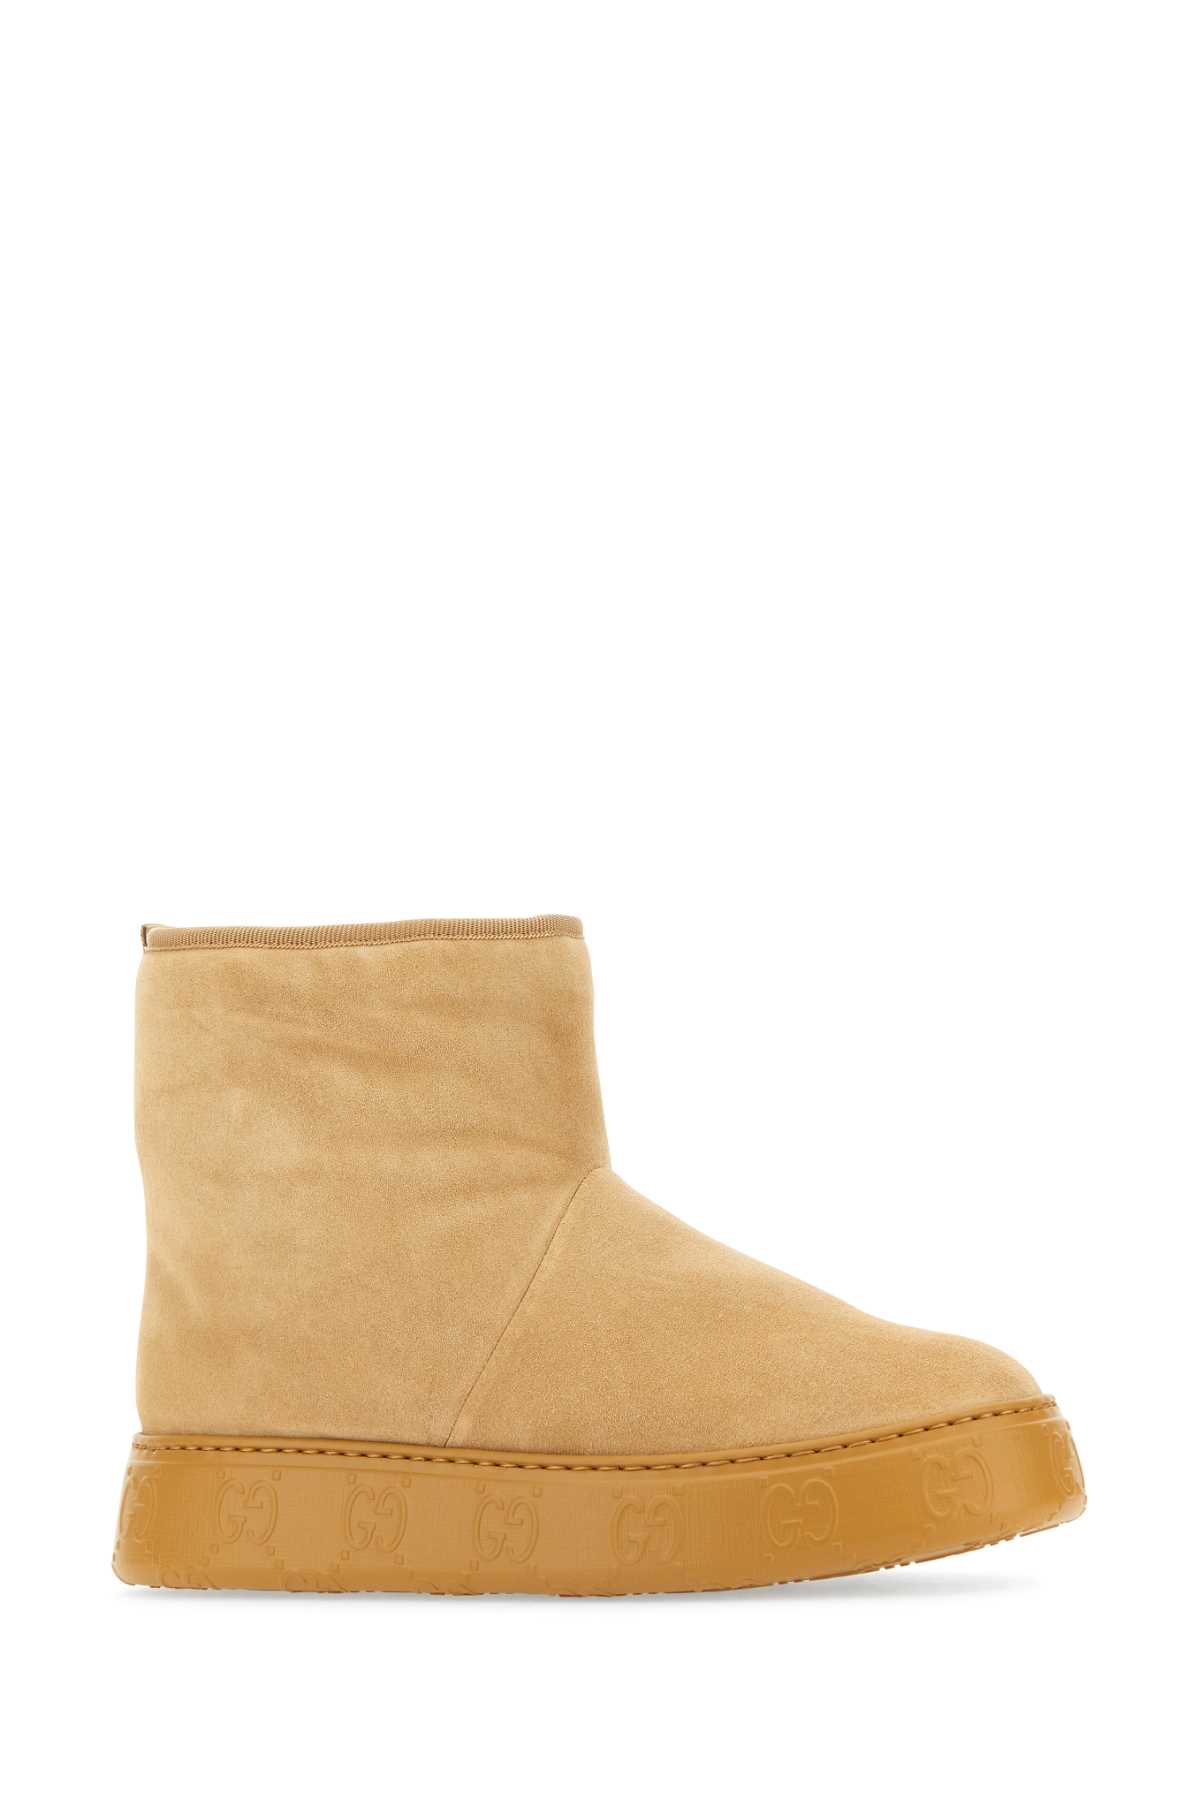 GUCCI BEIGE SUEDE ANKLE BOOTS